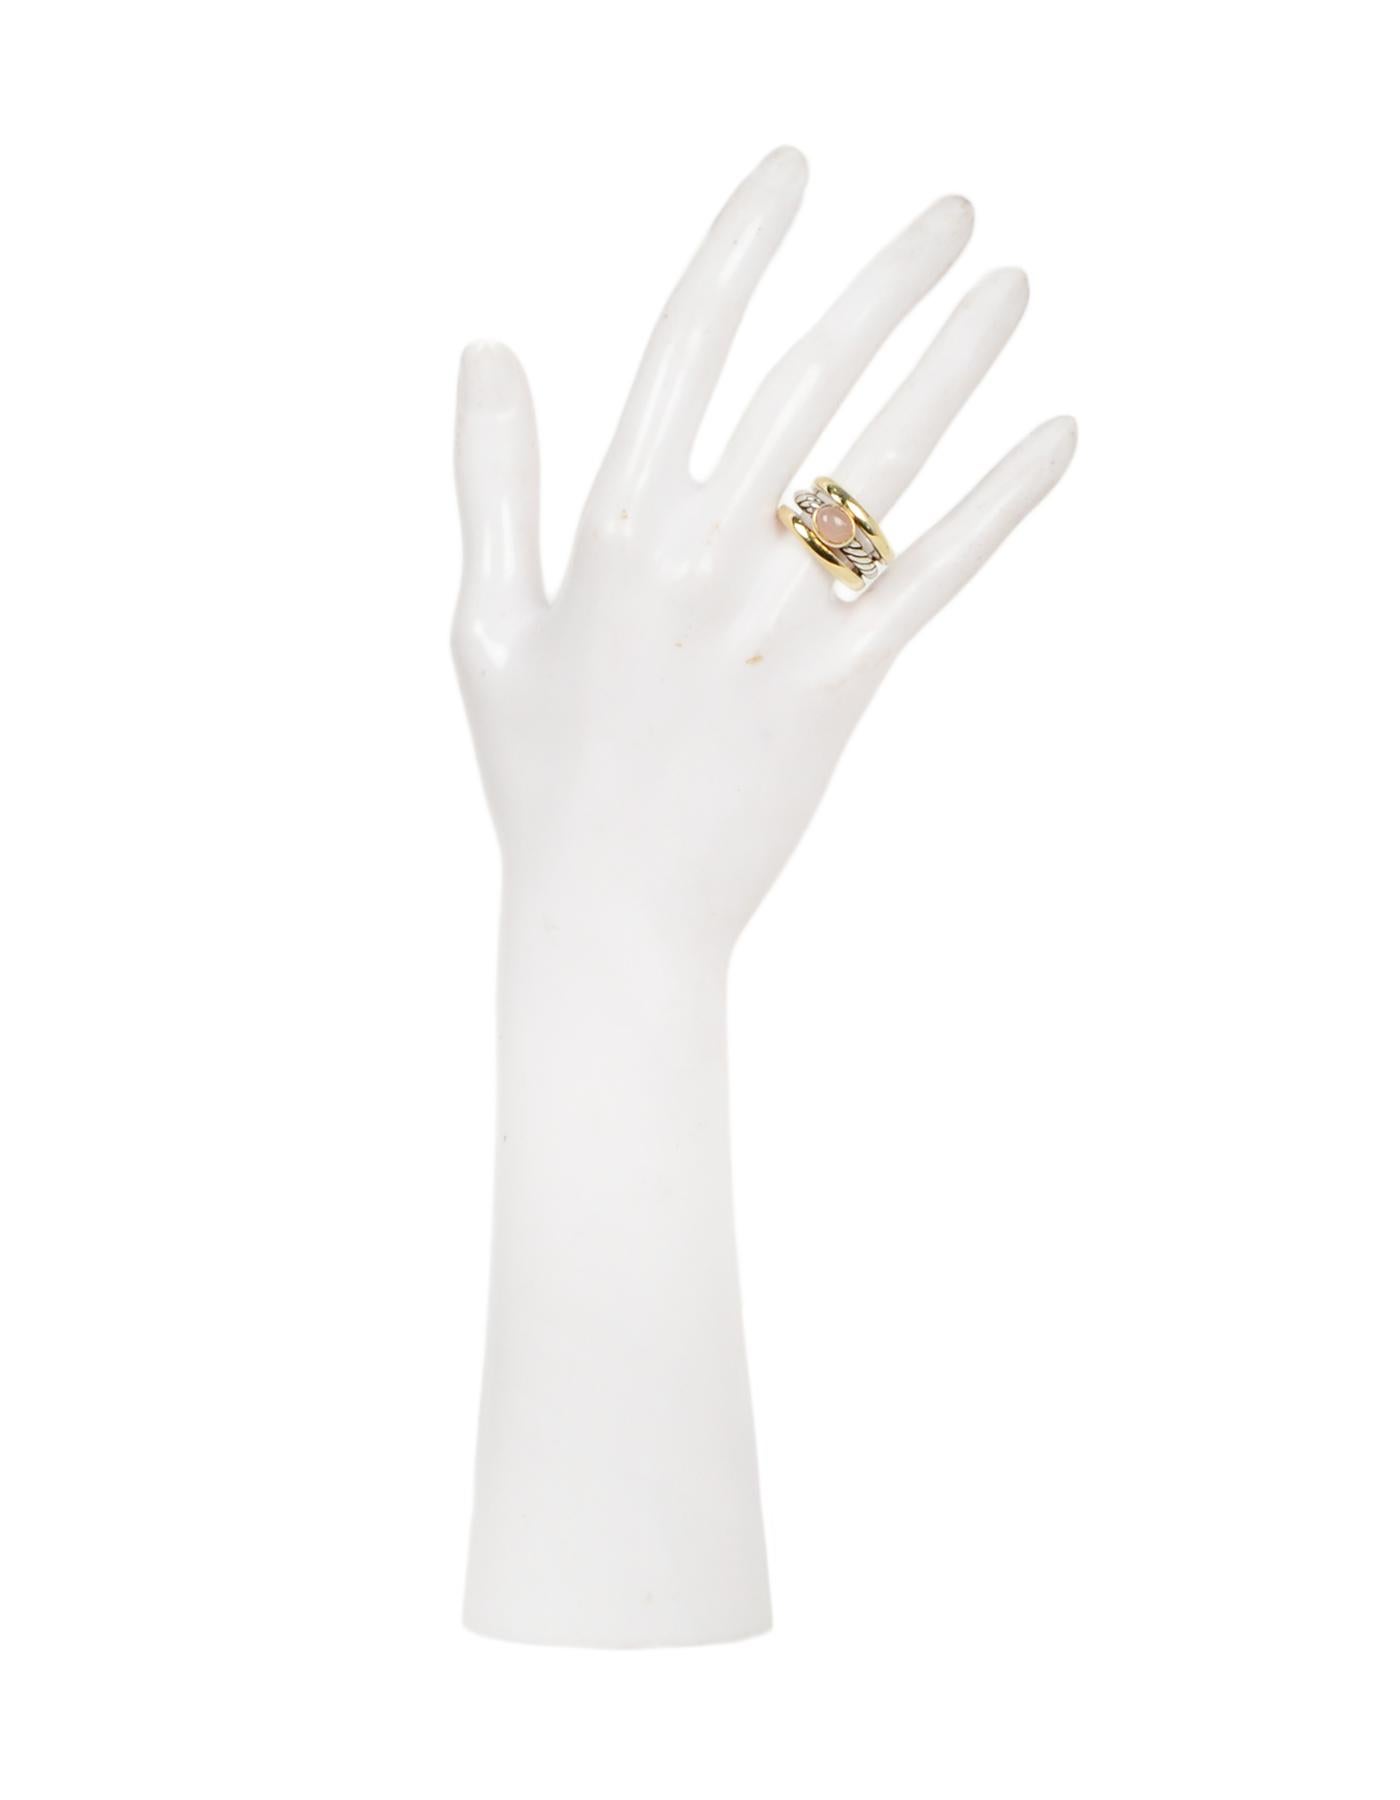 David Yurman 18K Gold & Sterling Silver Cable Ring w/ Peach Moonstone size 7 rt $1,290
Color: Silver, gold
Materials: 18K gold, sterling silver
Hallmarks: © DY 925 750
Closure/Opening: Slide on
Overall Condition: Very good pre-owned condition, with